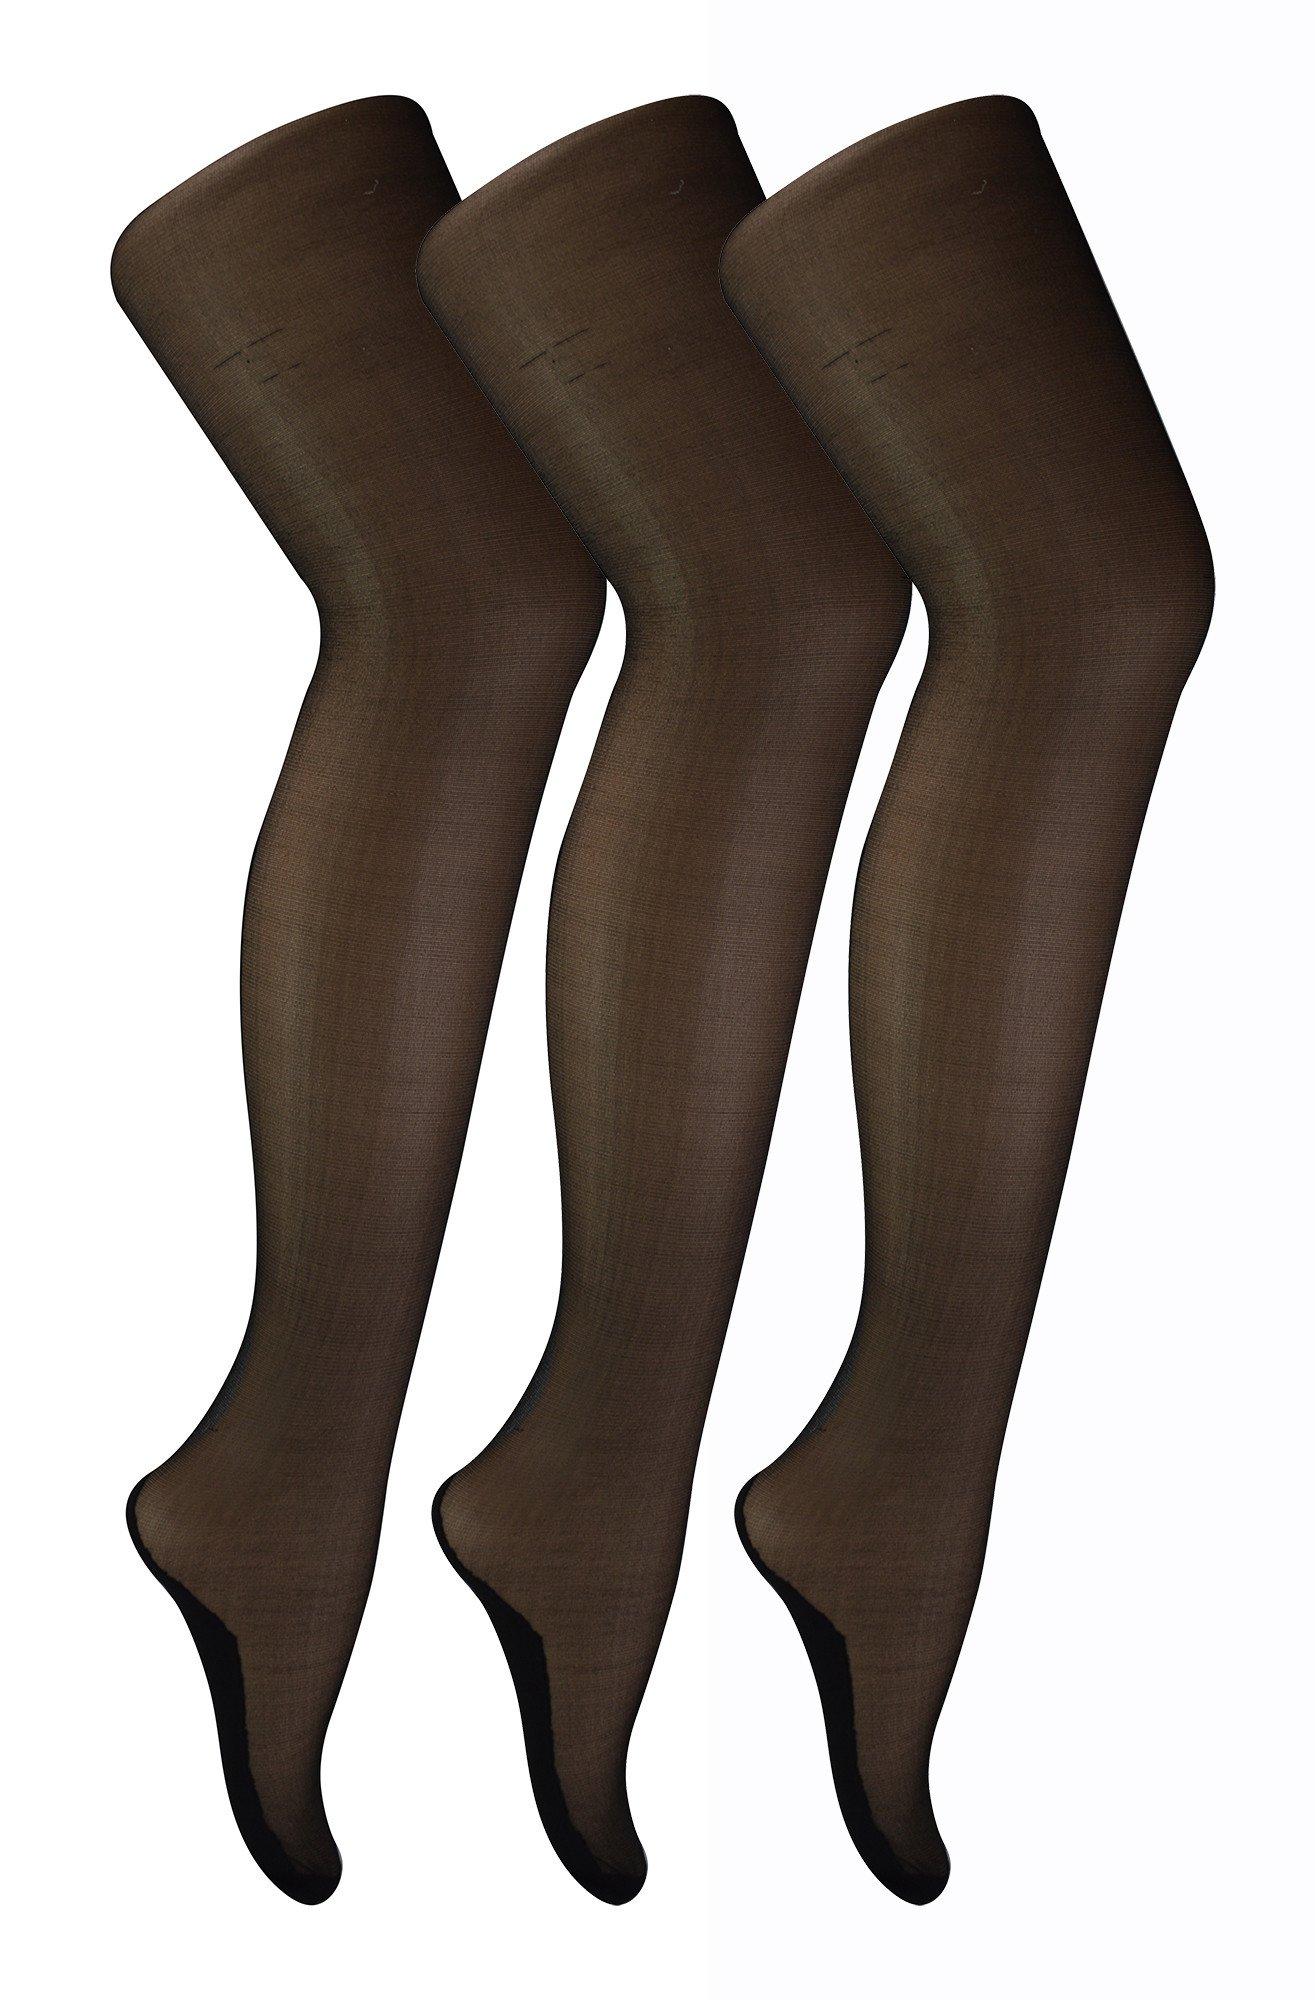 3 Pair 40 Denier Seamed Ultra Sheen Tights with Line Up the Back